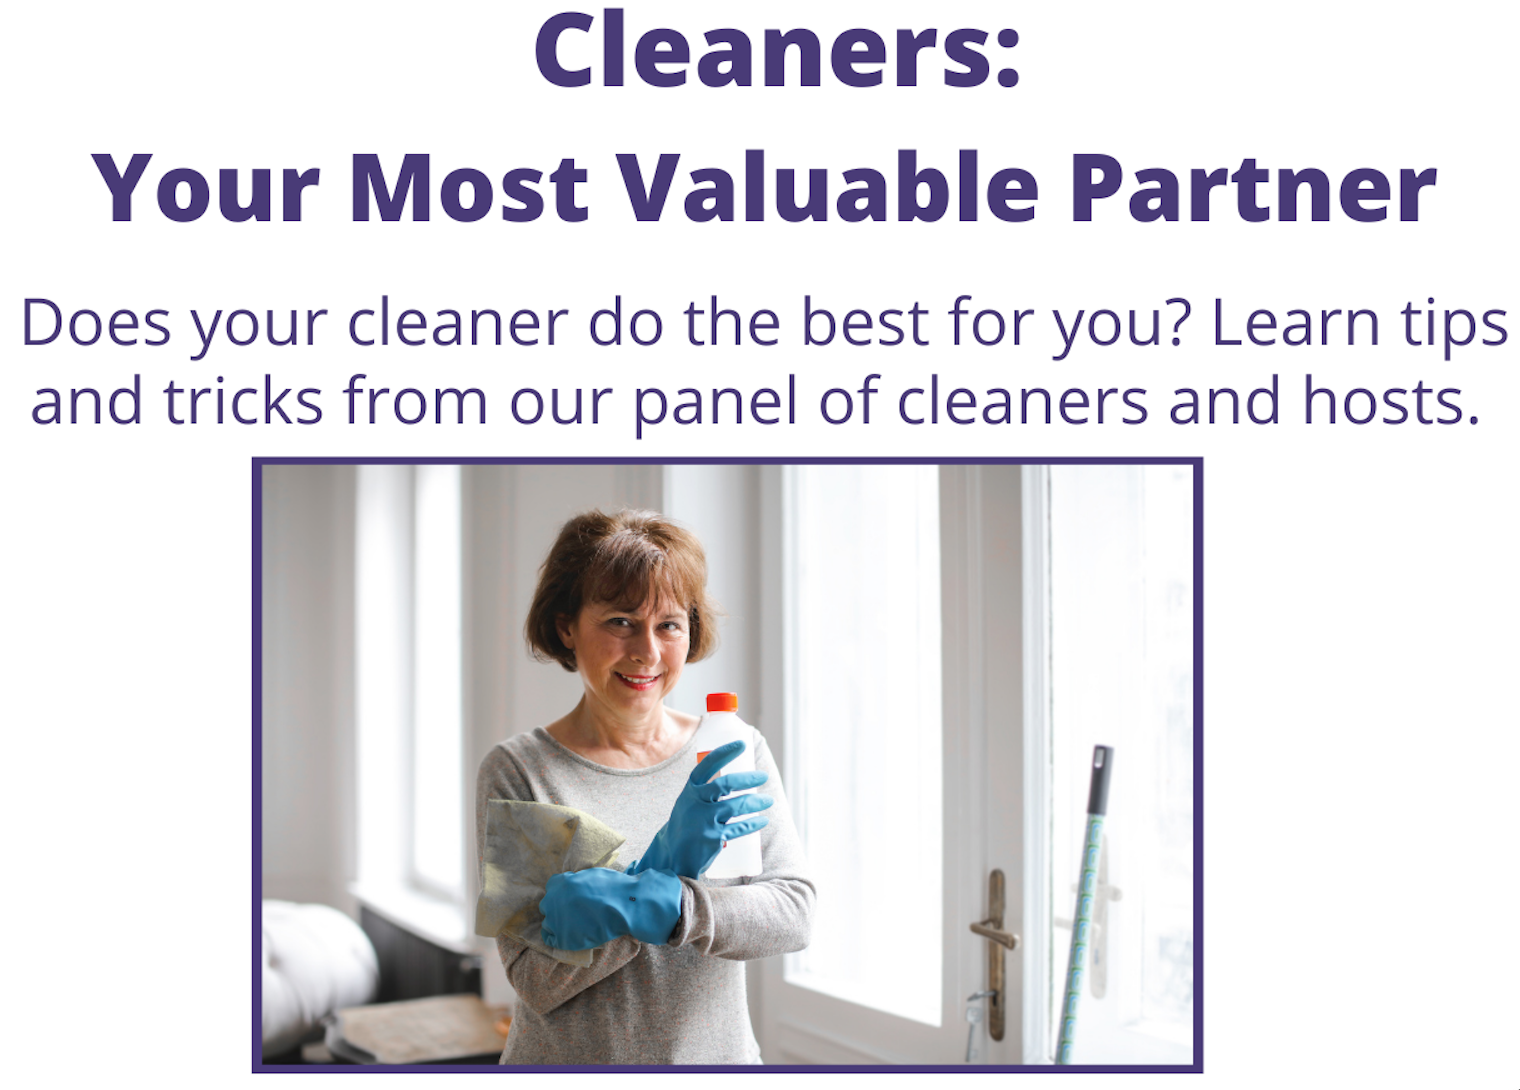 Cleaners: Your Most Valuable Partner with image of a woman cleaning a house